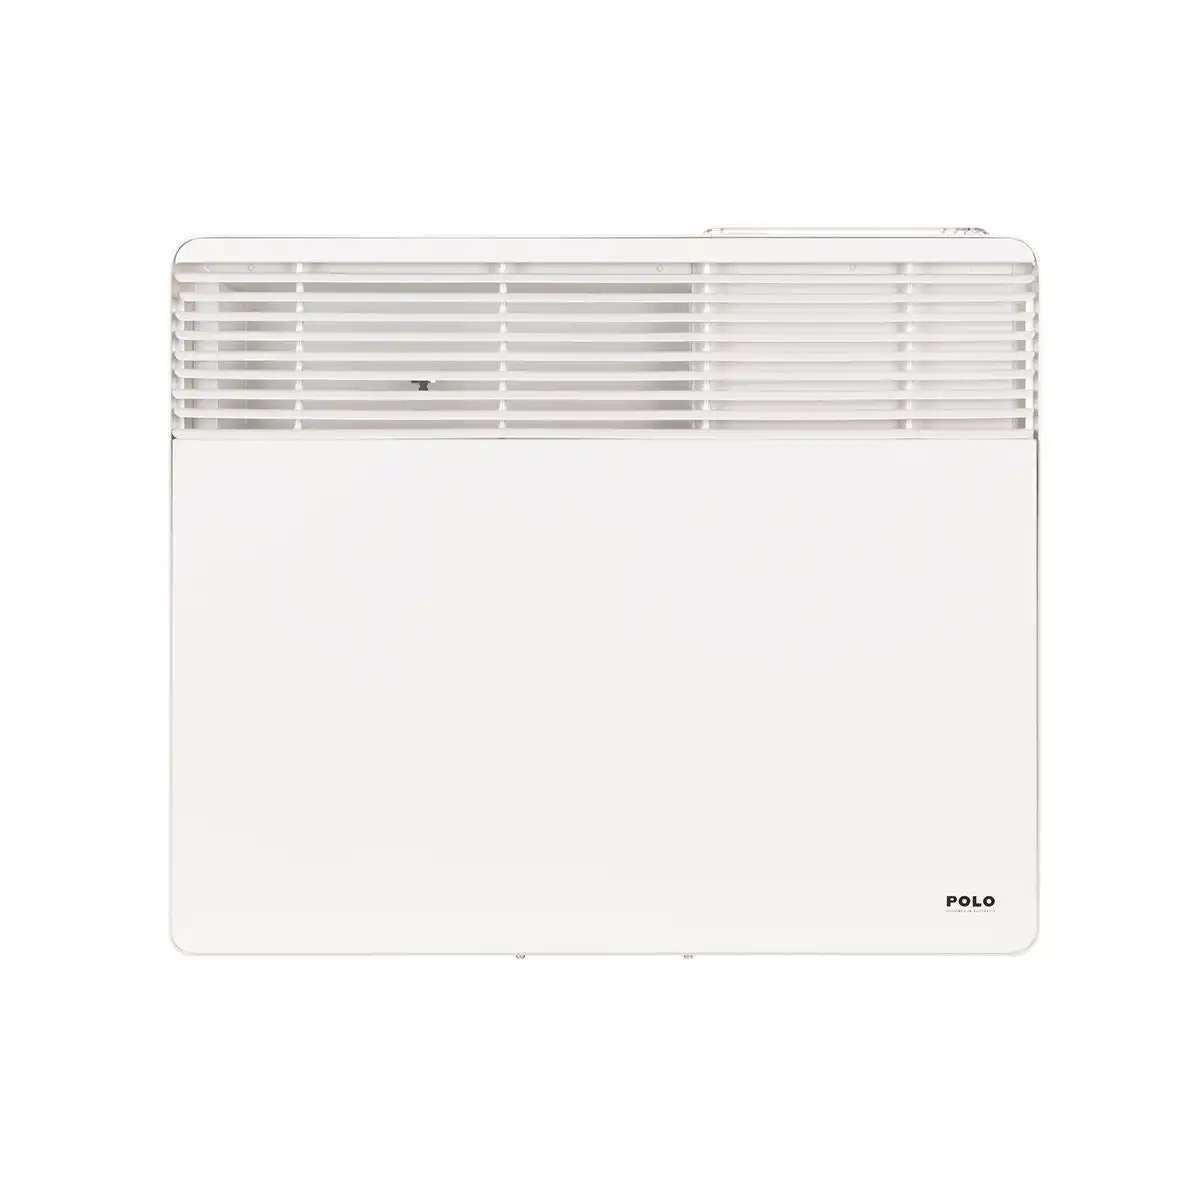 Polo Cool Polo 1KW Electric Panel Heater